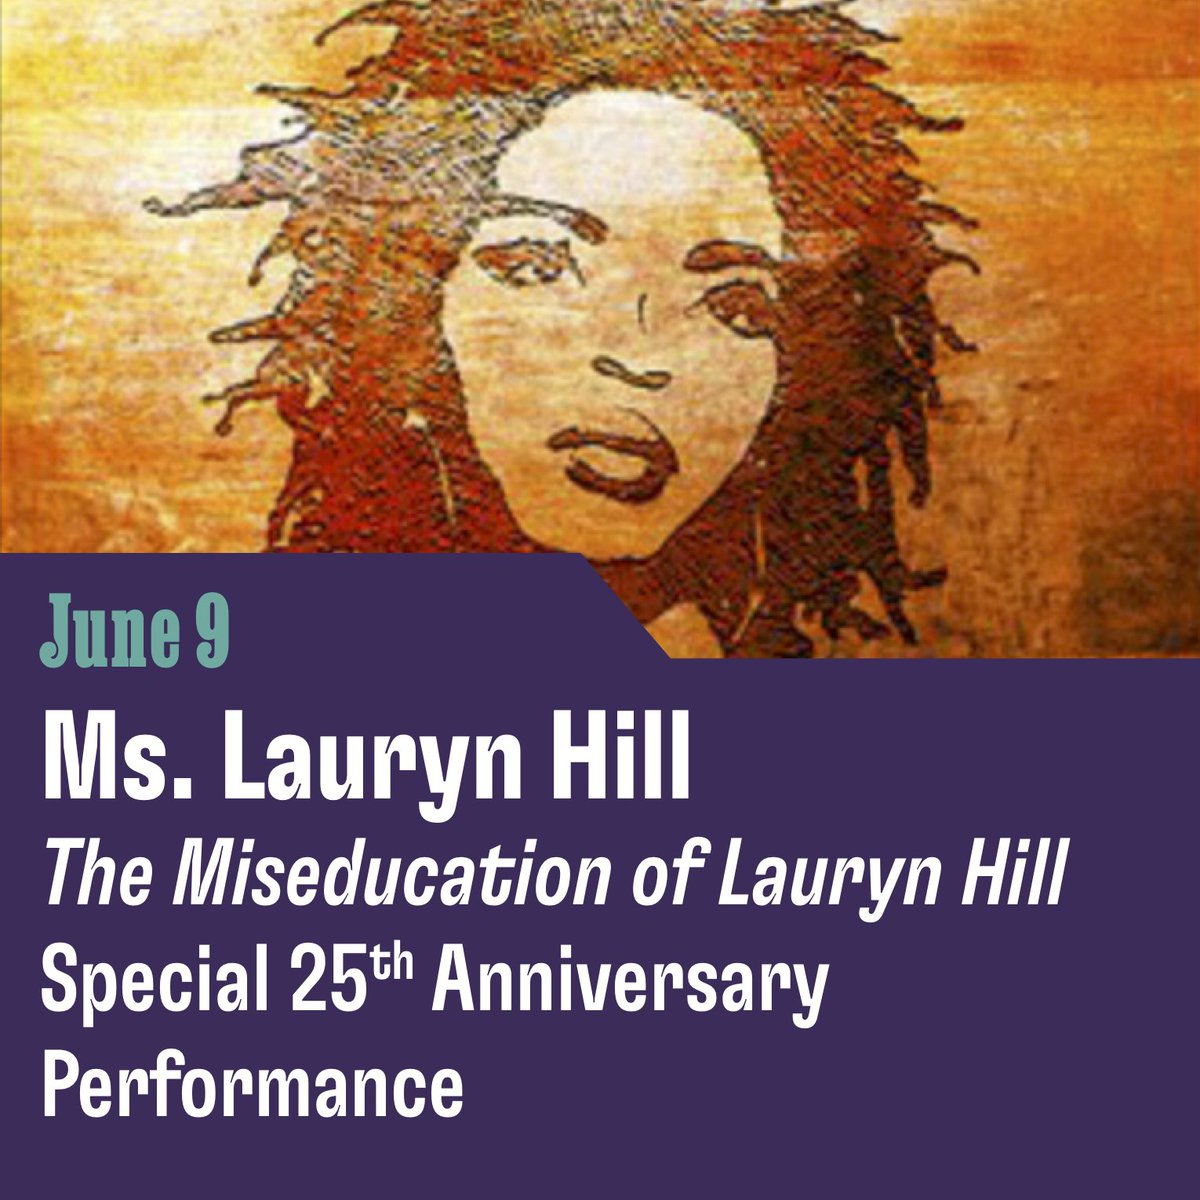 I’ll be celebrating the 25th Anniversary of “The Miseducation of Lauryn Hill” at @Wolf_Trap on June 9th. Tickets available at wolftrap.org/f/060923